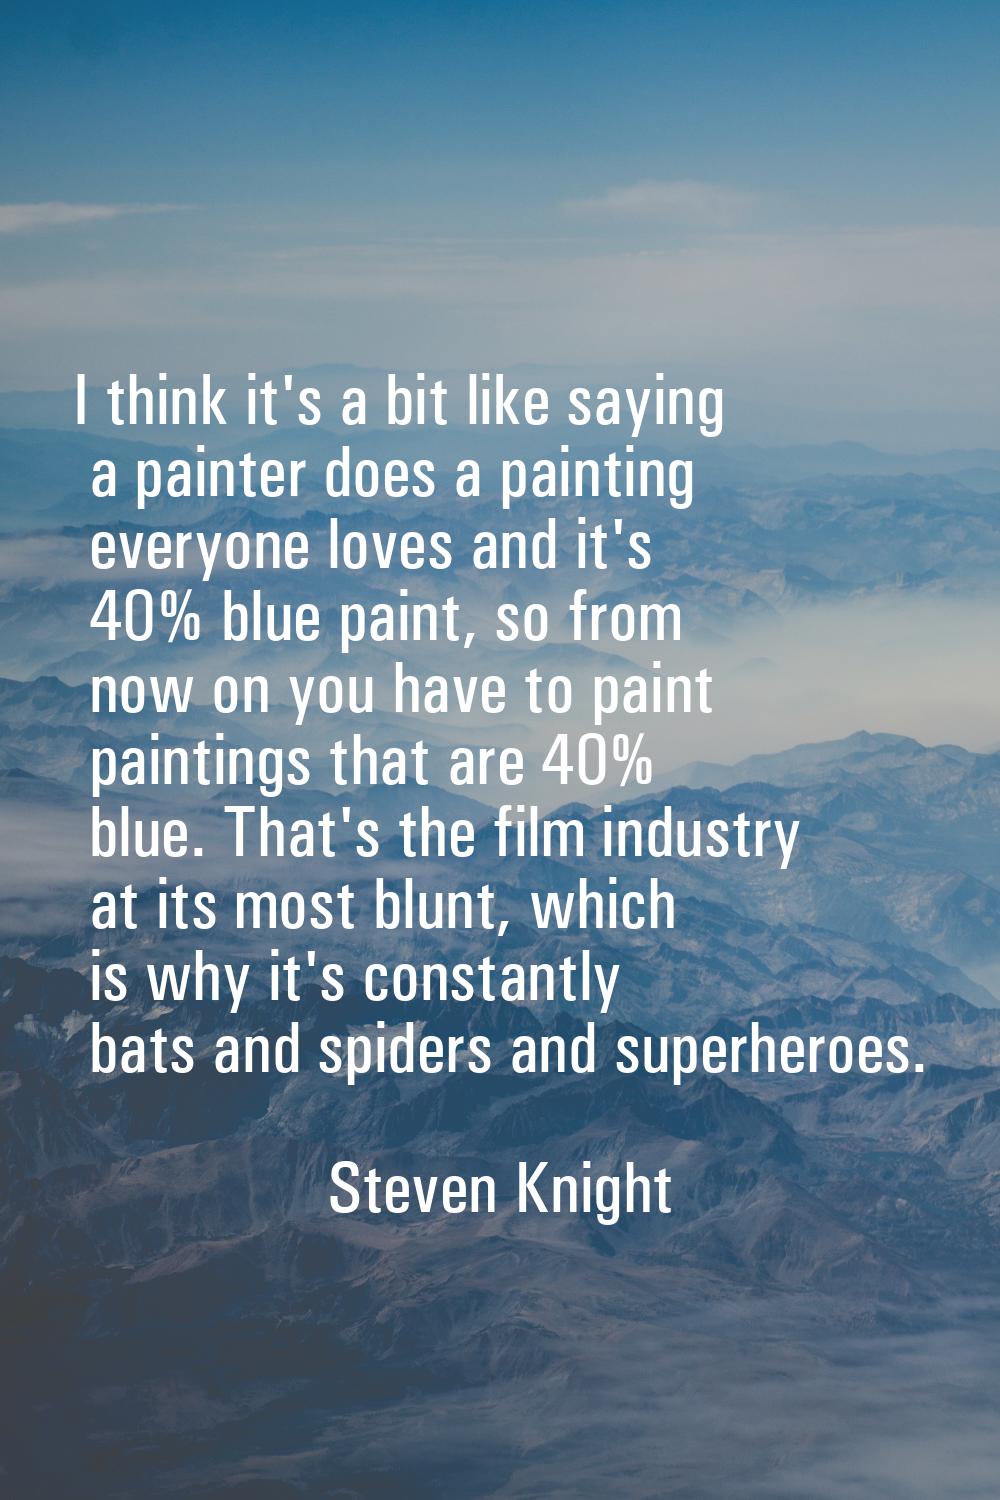 I think it's a bit like saying a painter does a painting everyone loves and it's 40% blue paint, so